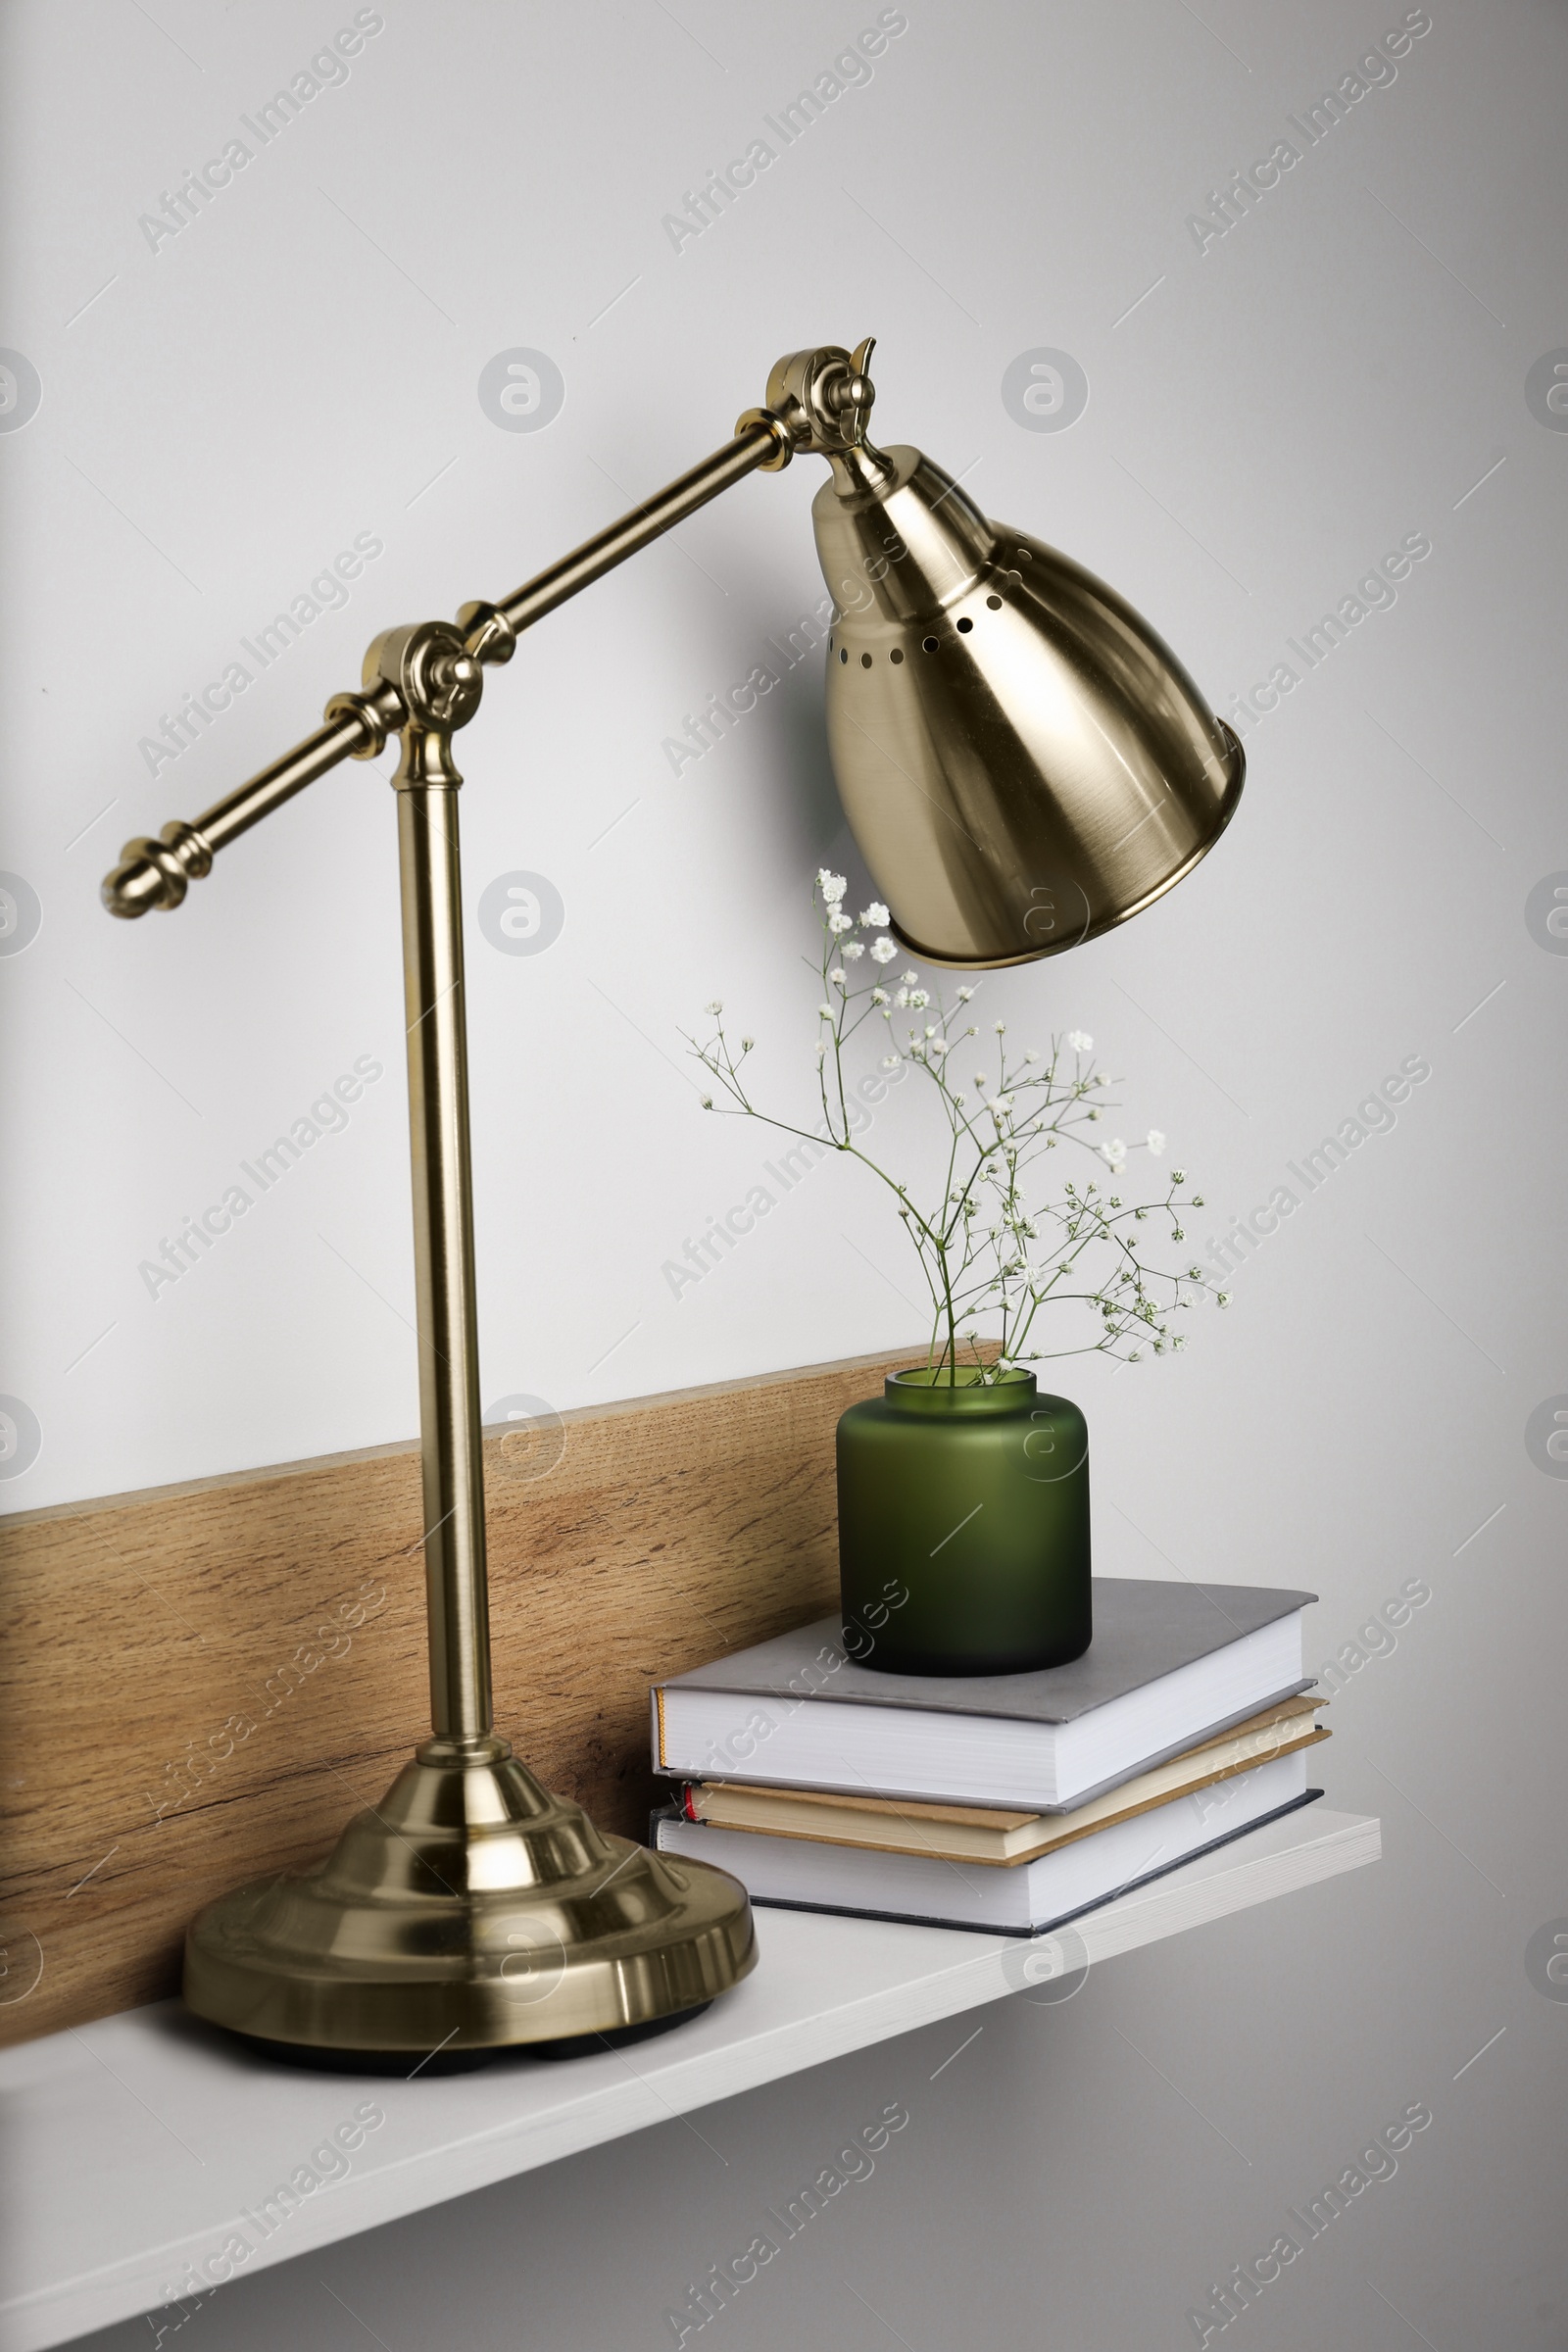 Photo of Lamp, vase with gypsophila flowers and stack of books on shelf indoors